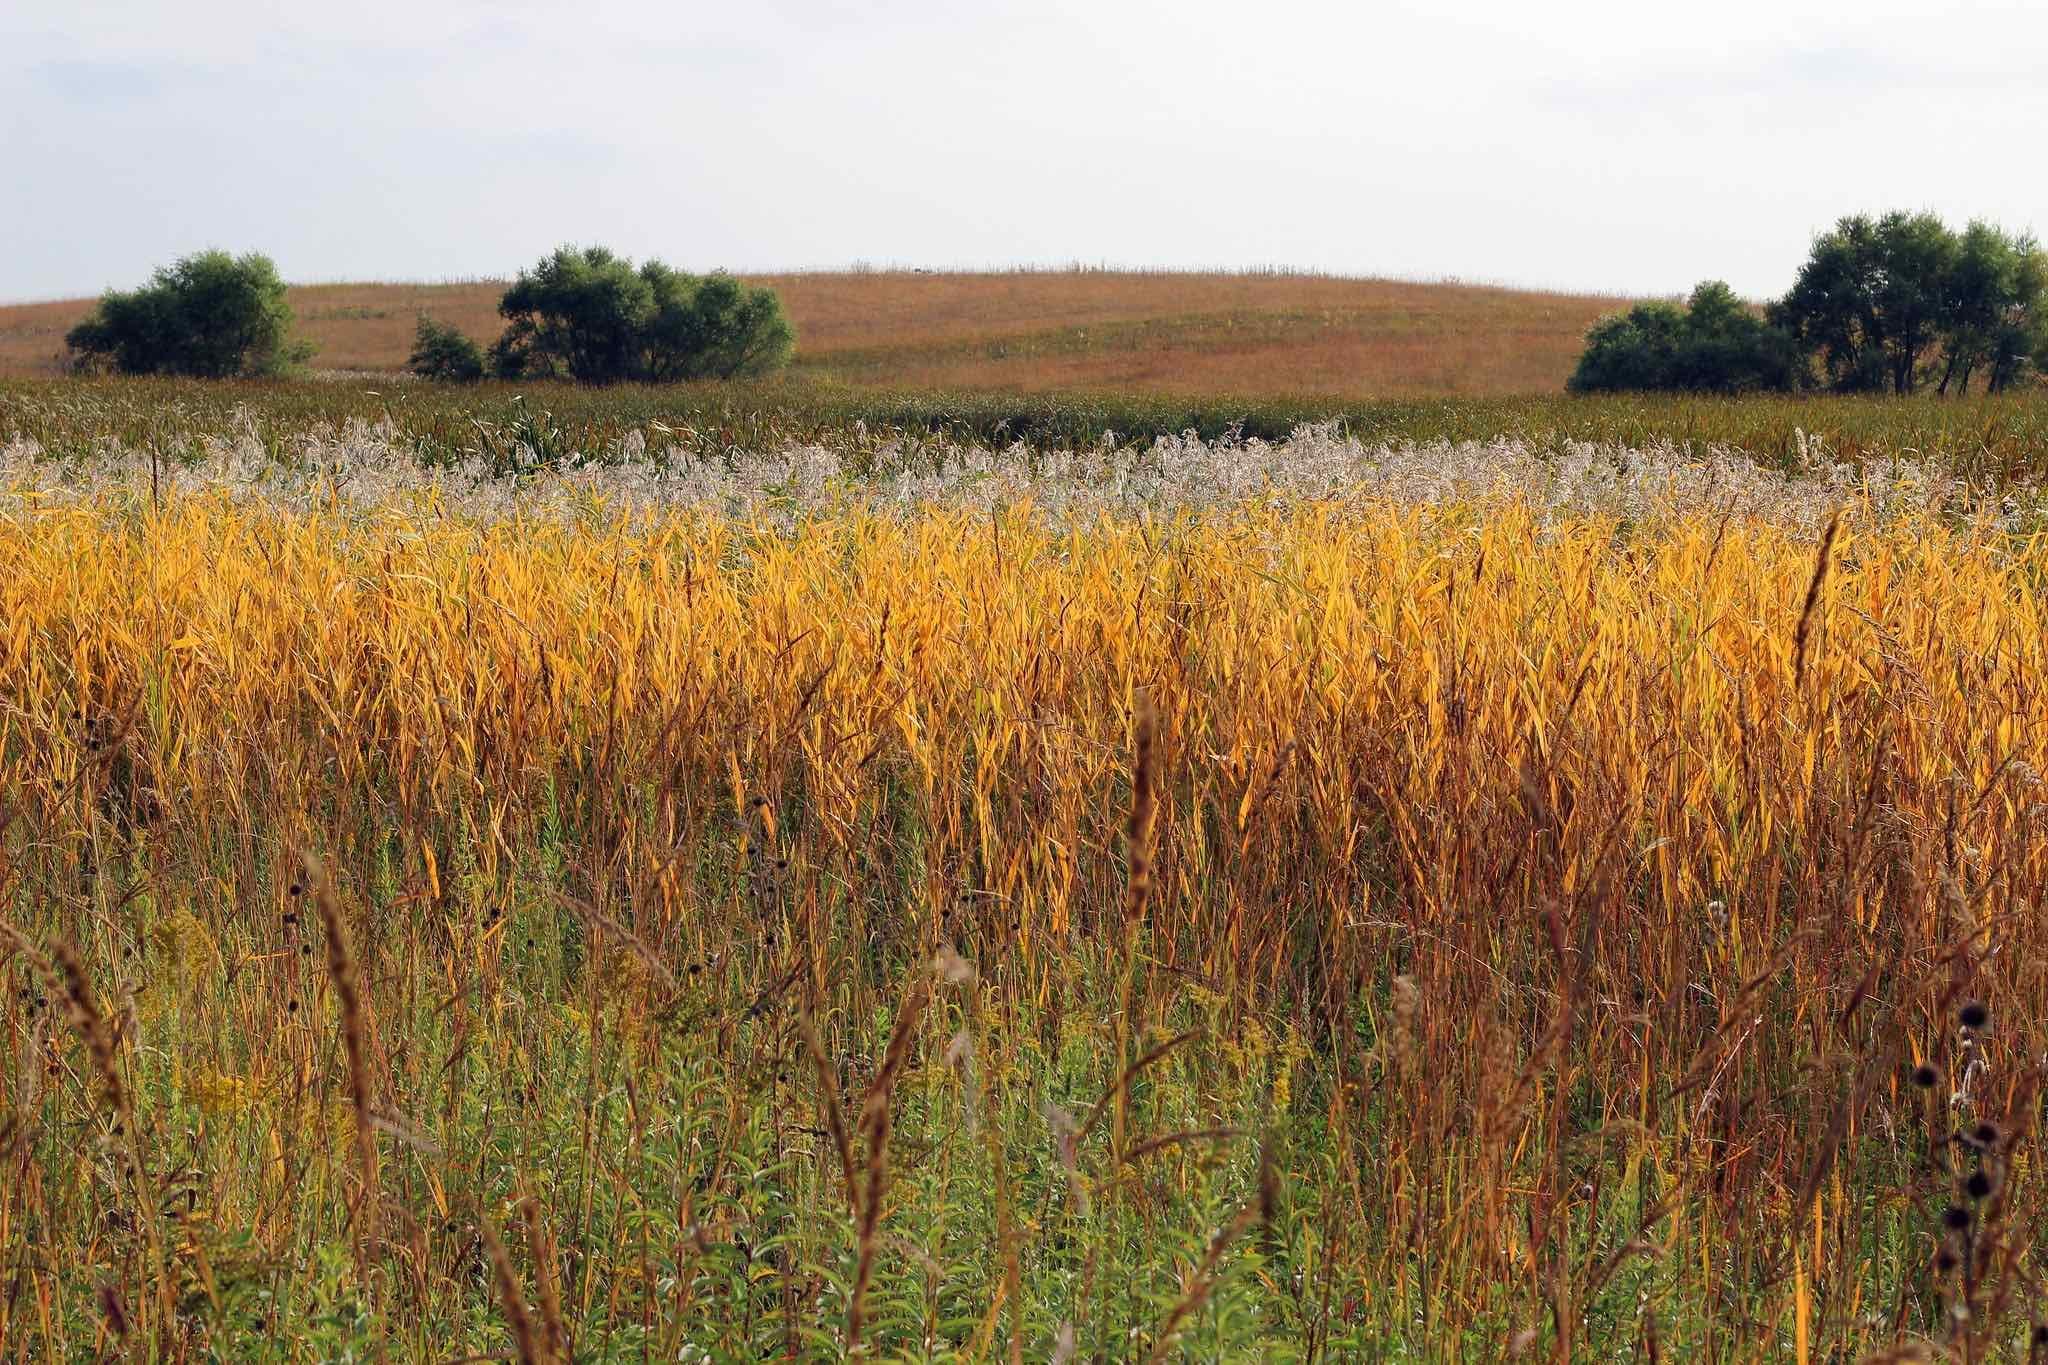 Prairies sport fall color, too. (Courtney Celley / US Fish and Wildlife Service Midwest Region)